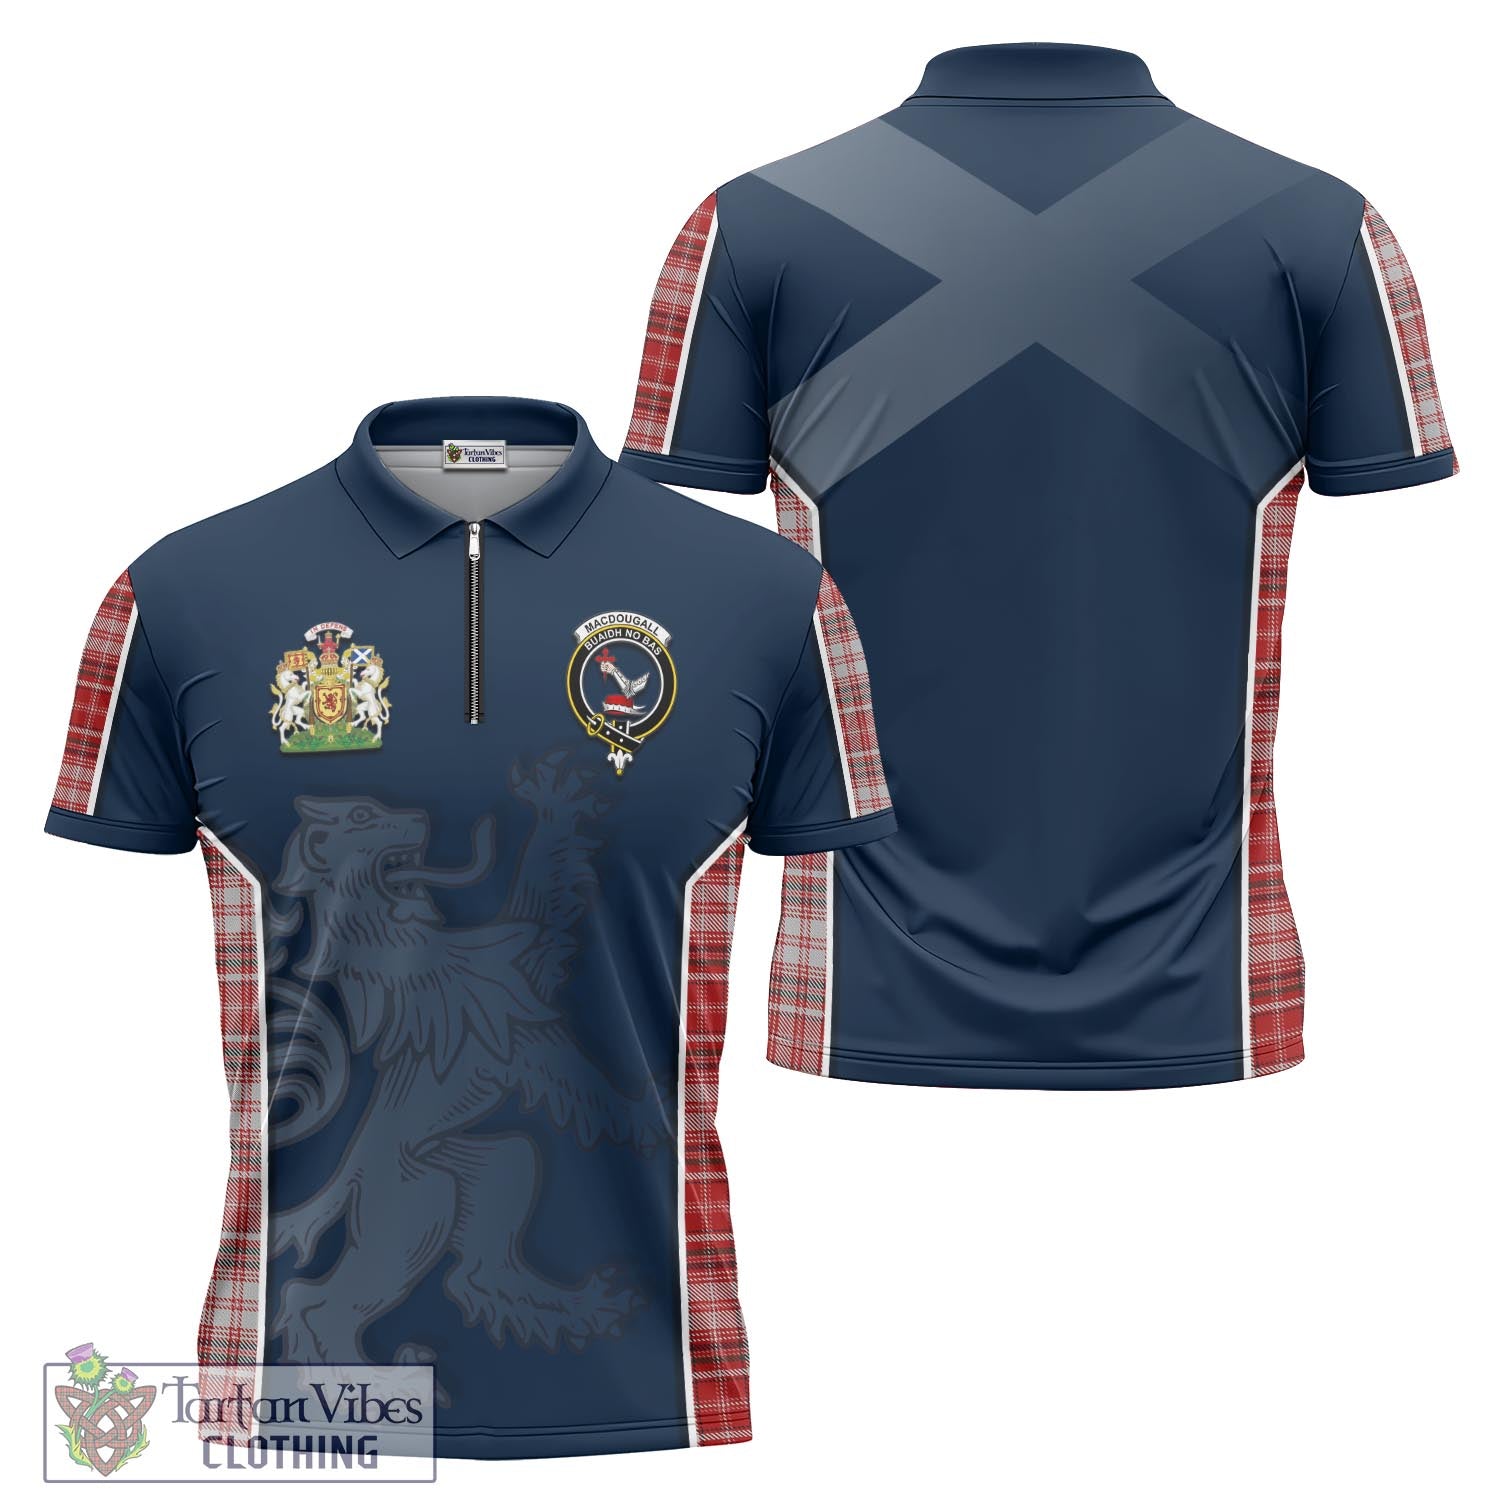 Tartan Vibes Clothing MacDougall Dress Tartan Zipper Polo Shirt with Family Crest and Lion Rampant Vibes Sport Style